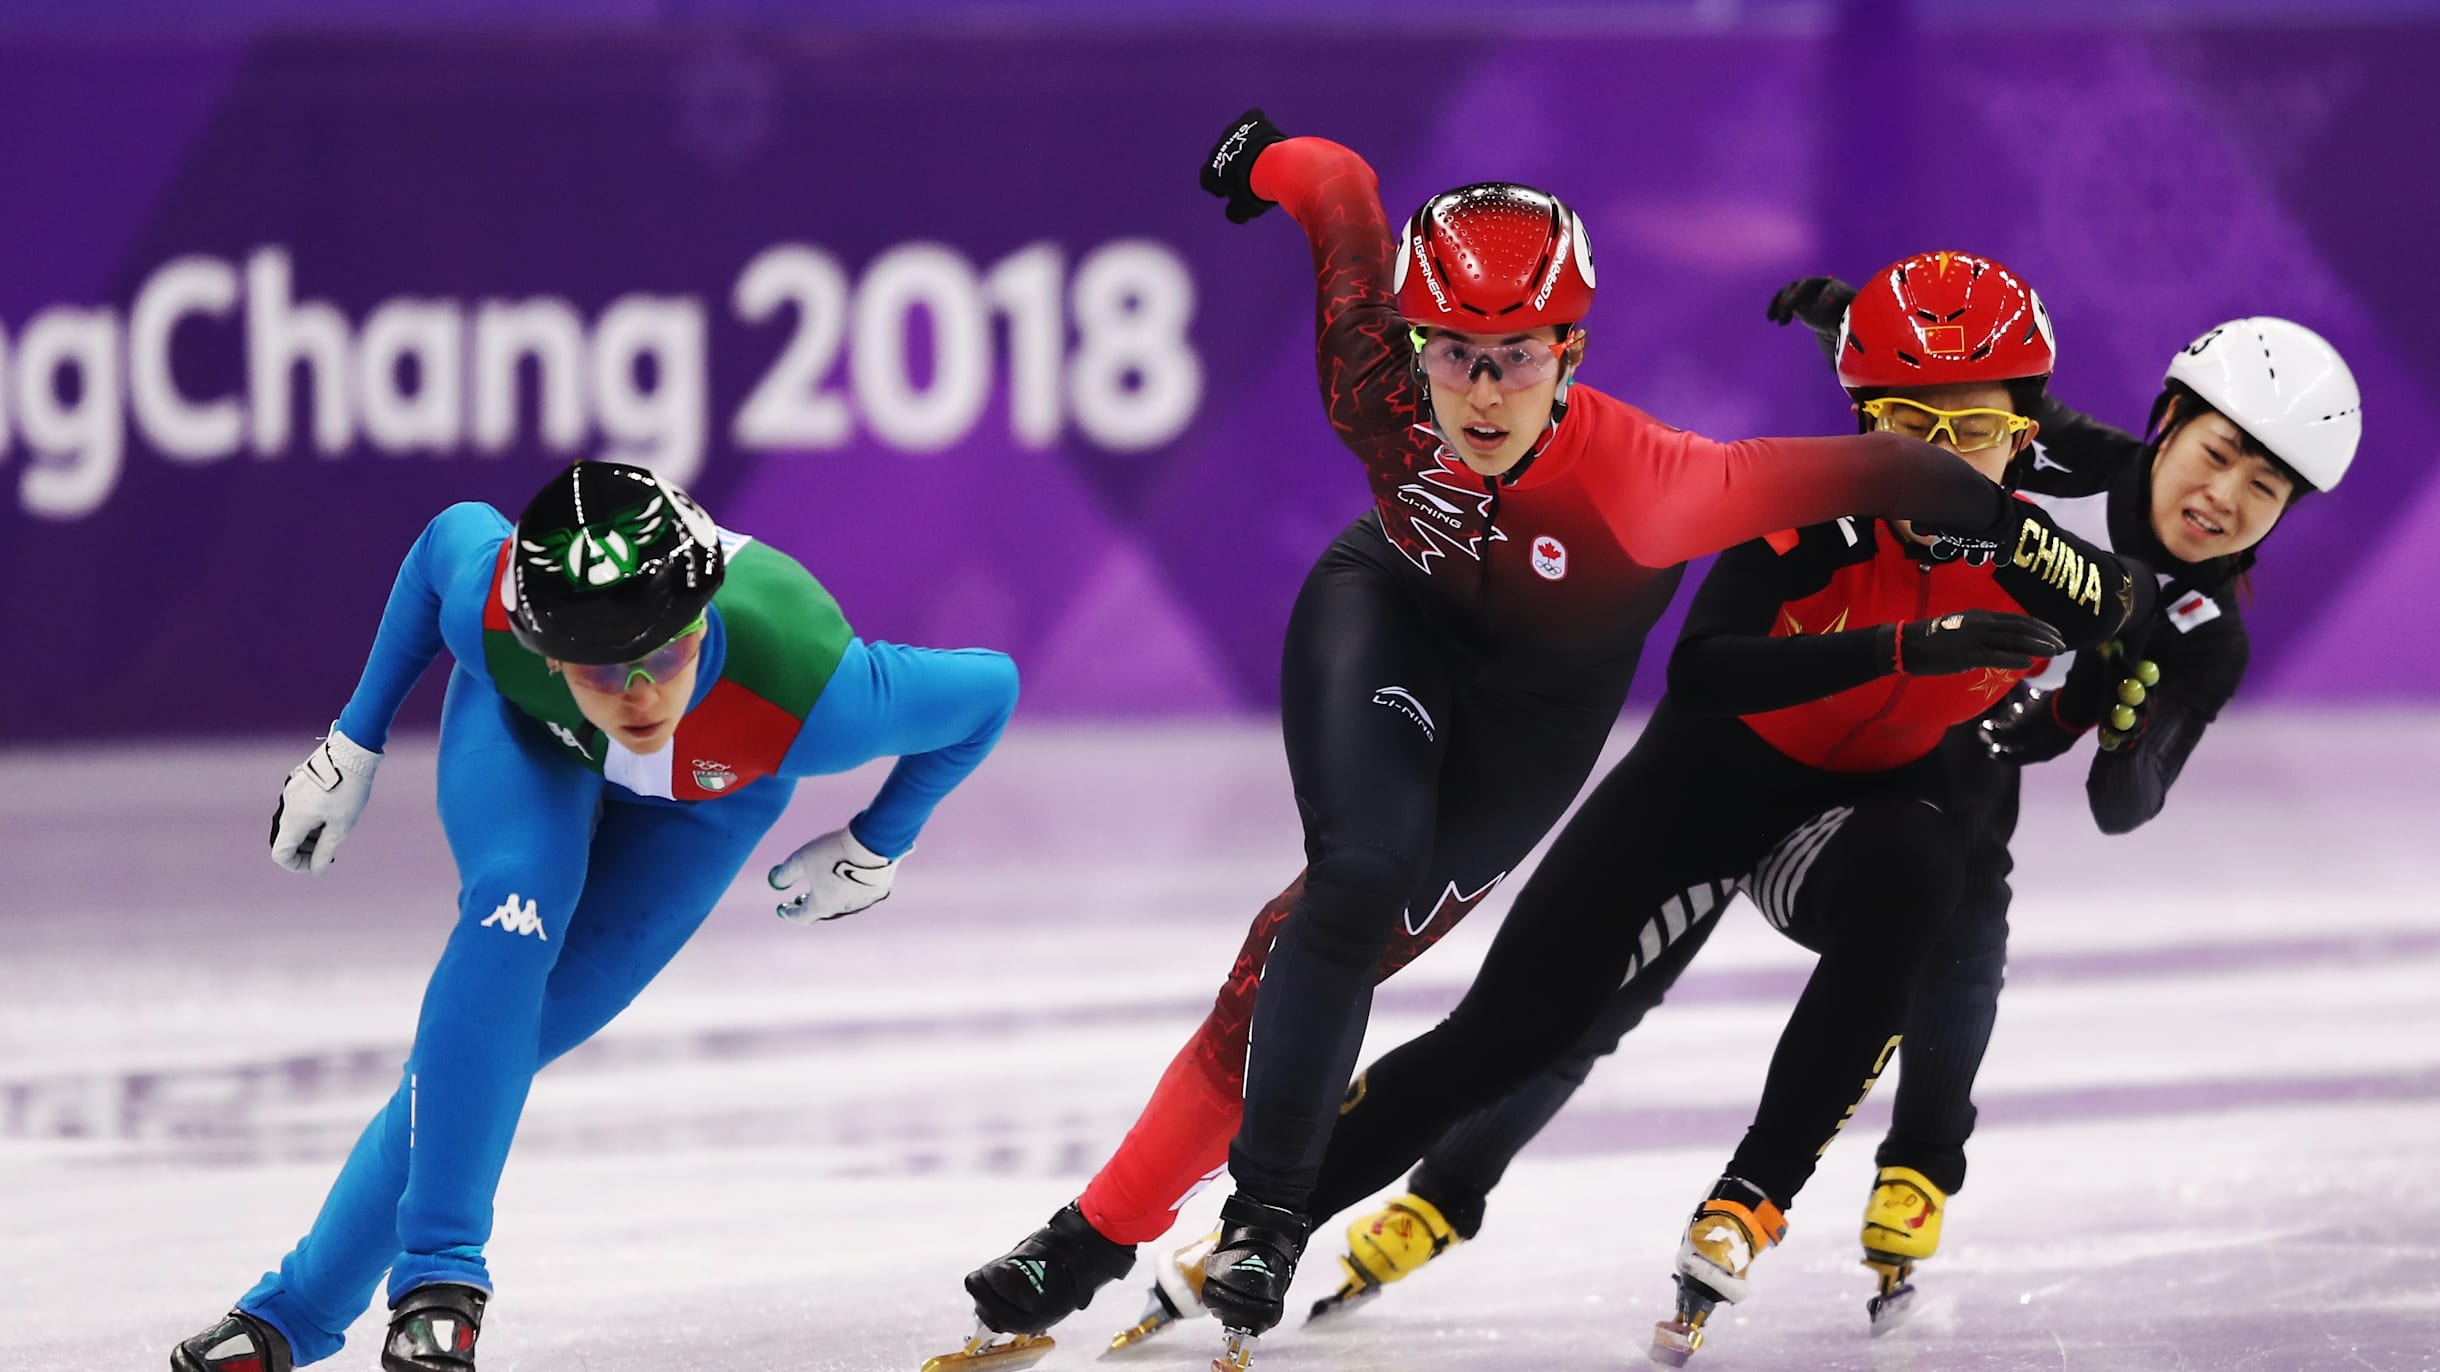 What are the differences between short track and speed skating?